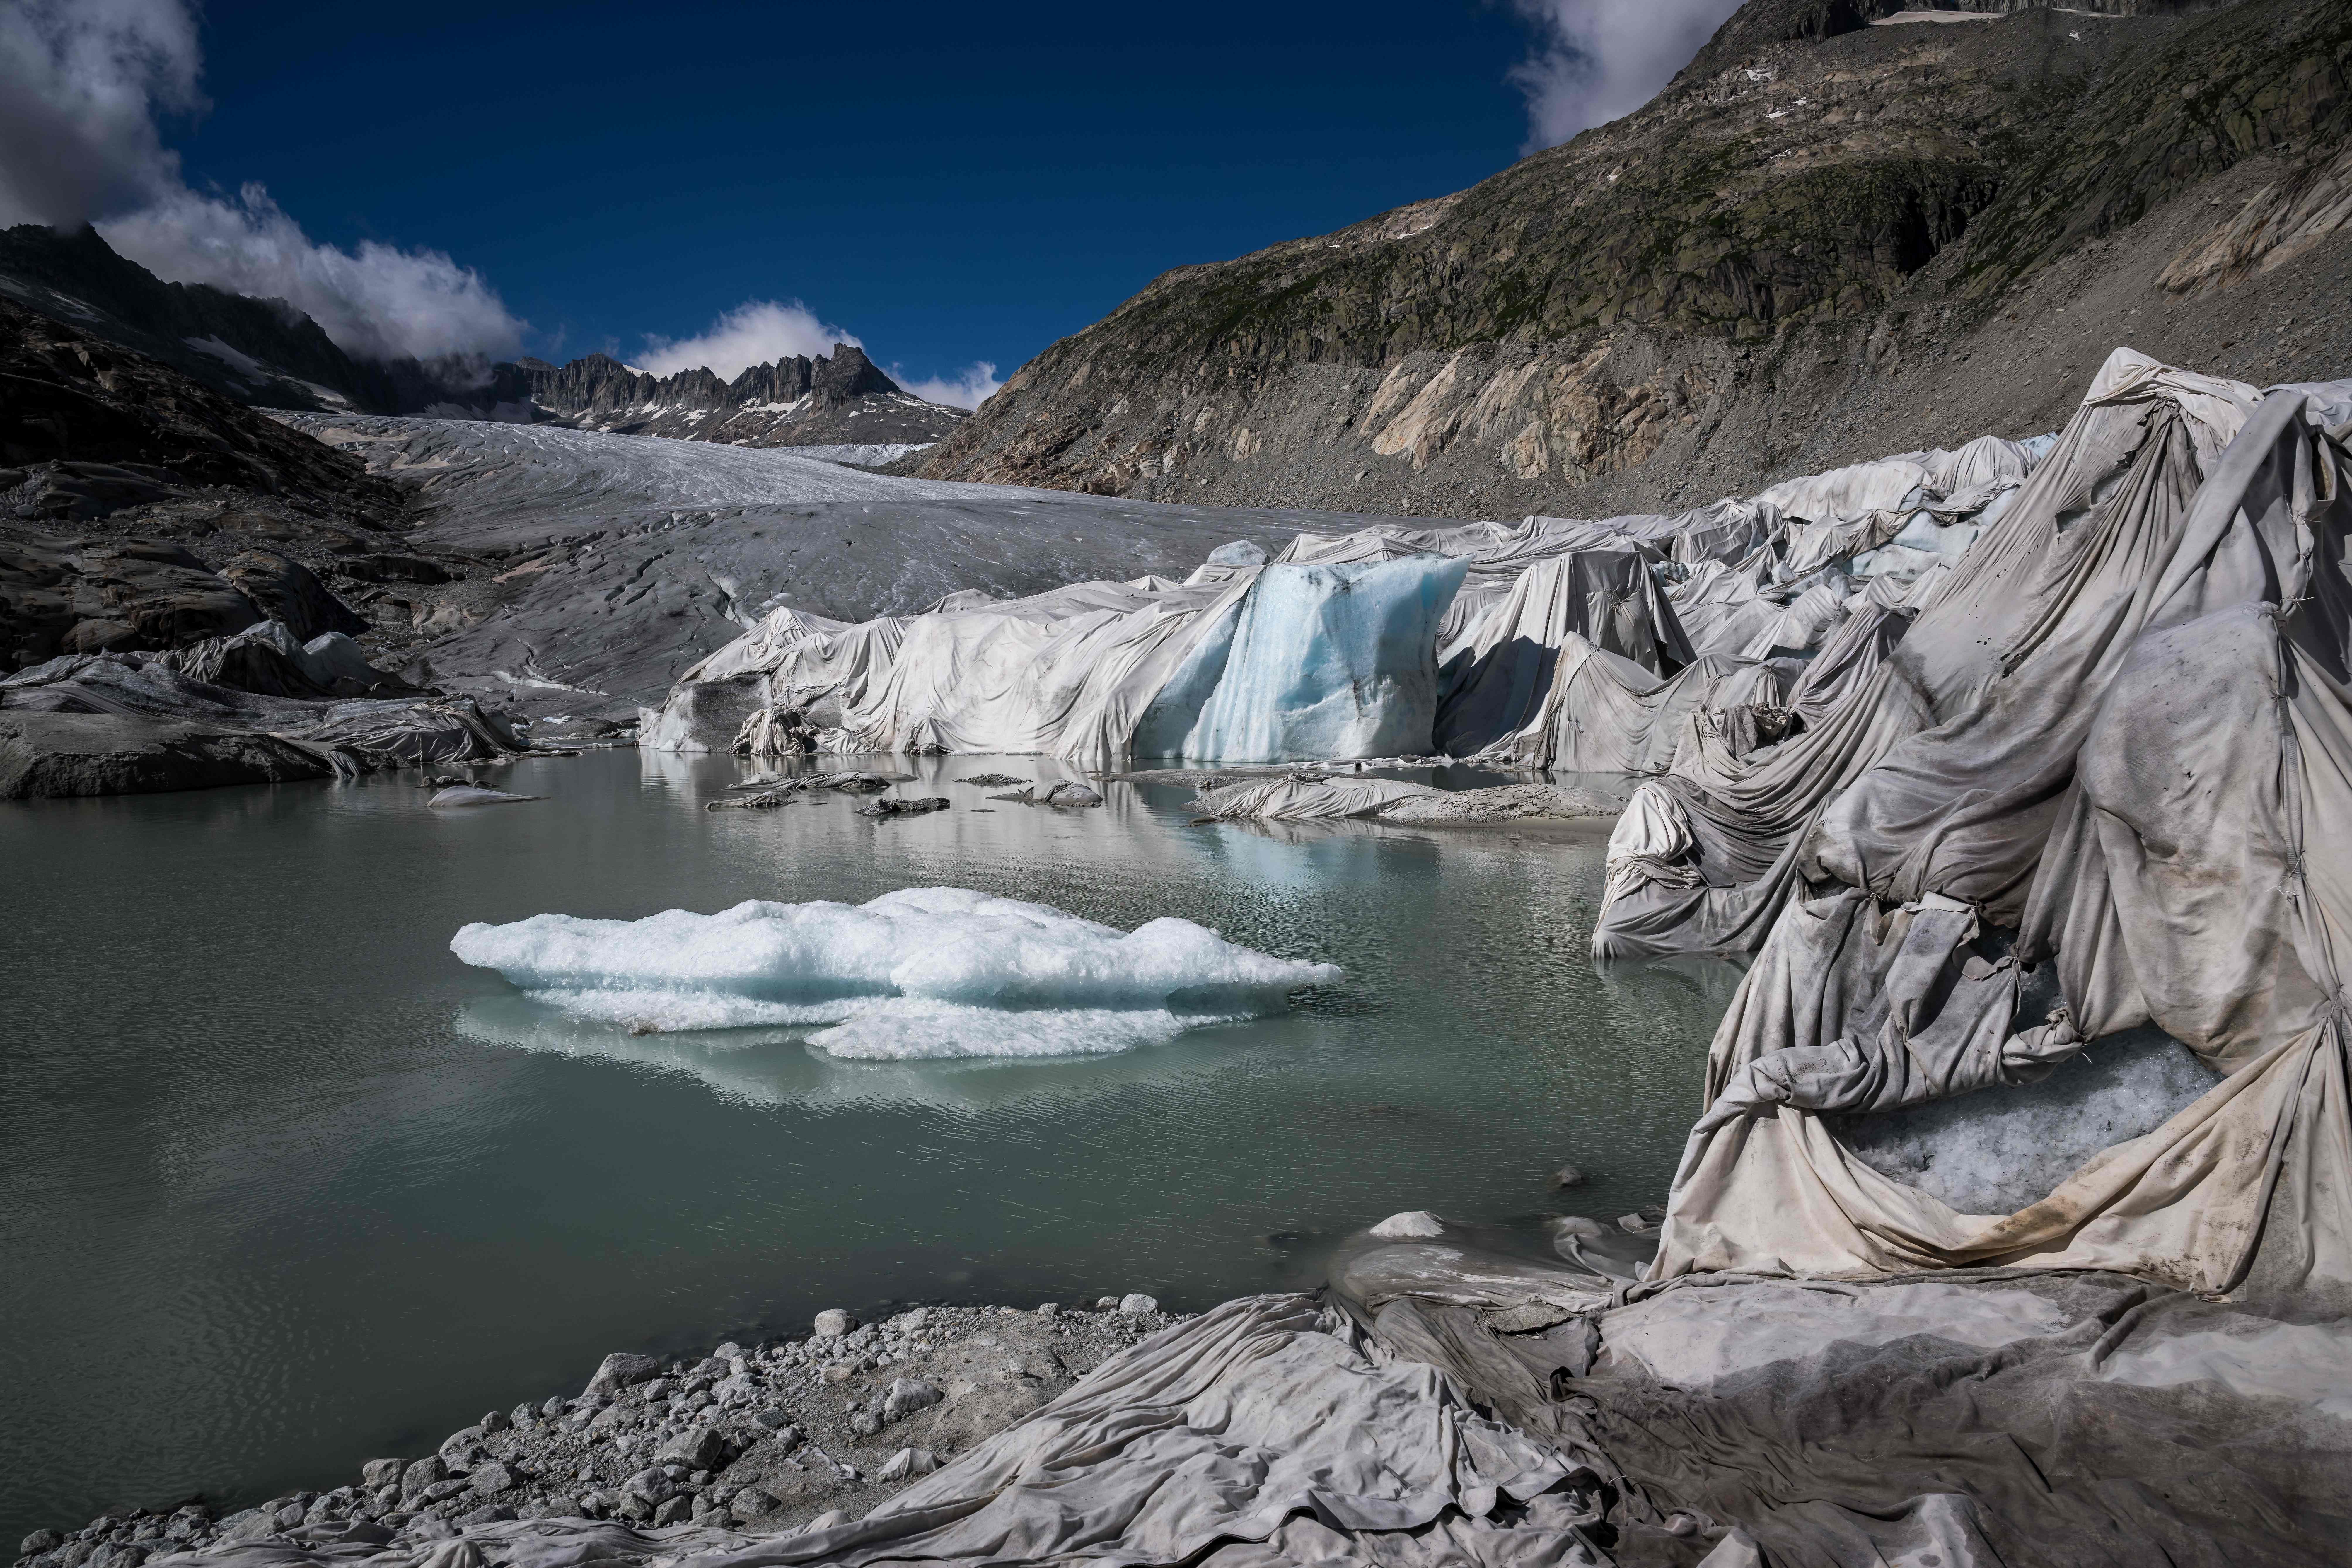 Insulating foam covering a part of Switzerland’s Rhone Glacier to prevent it from melting